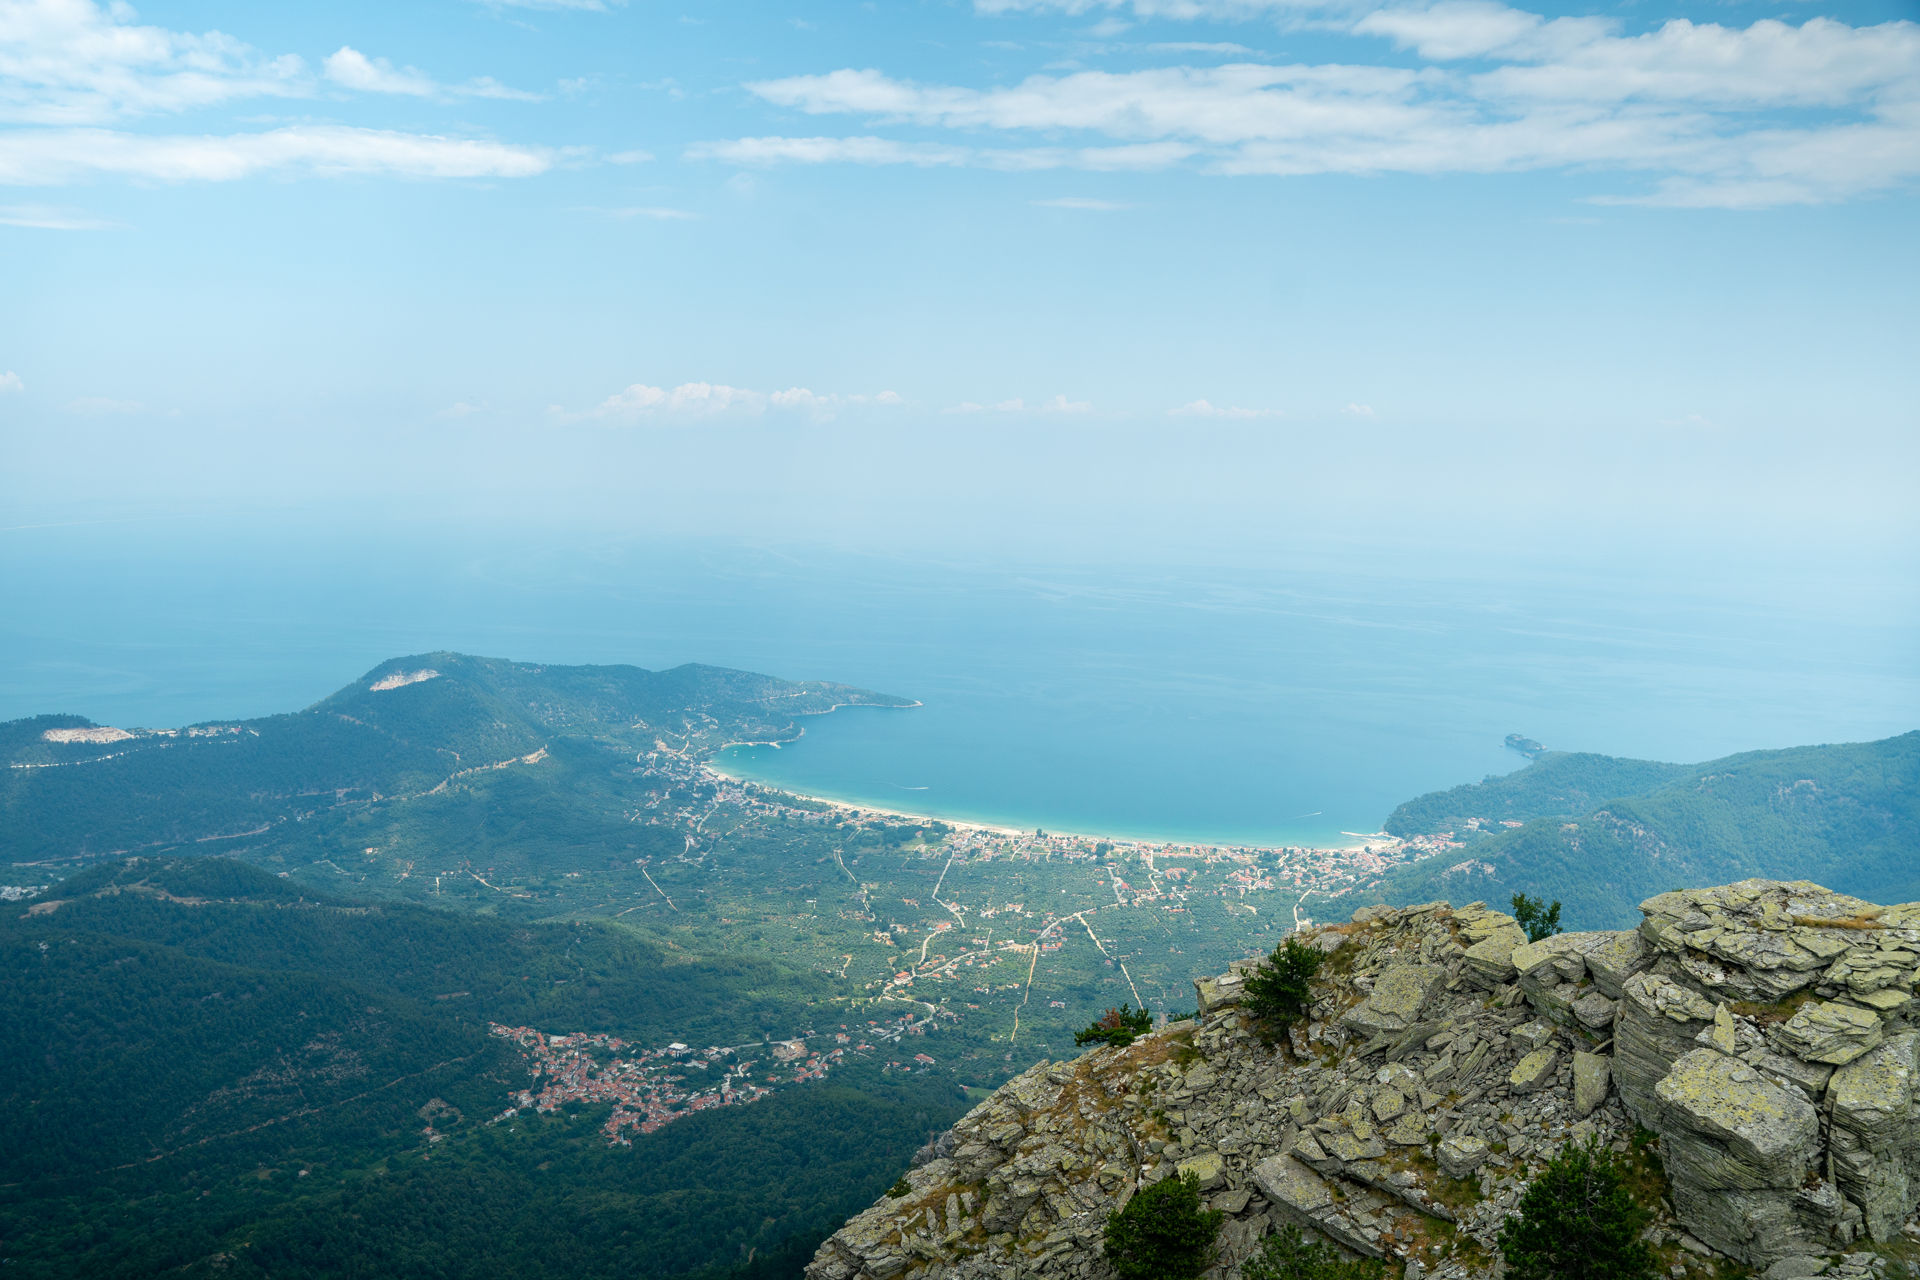 On Mt Ipsarion (1,204m)you'll experience even more incredible sea views